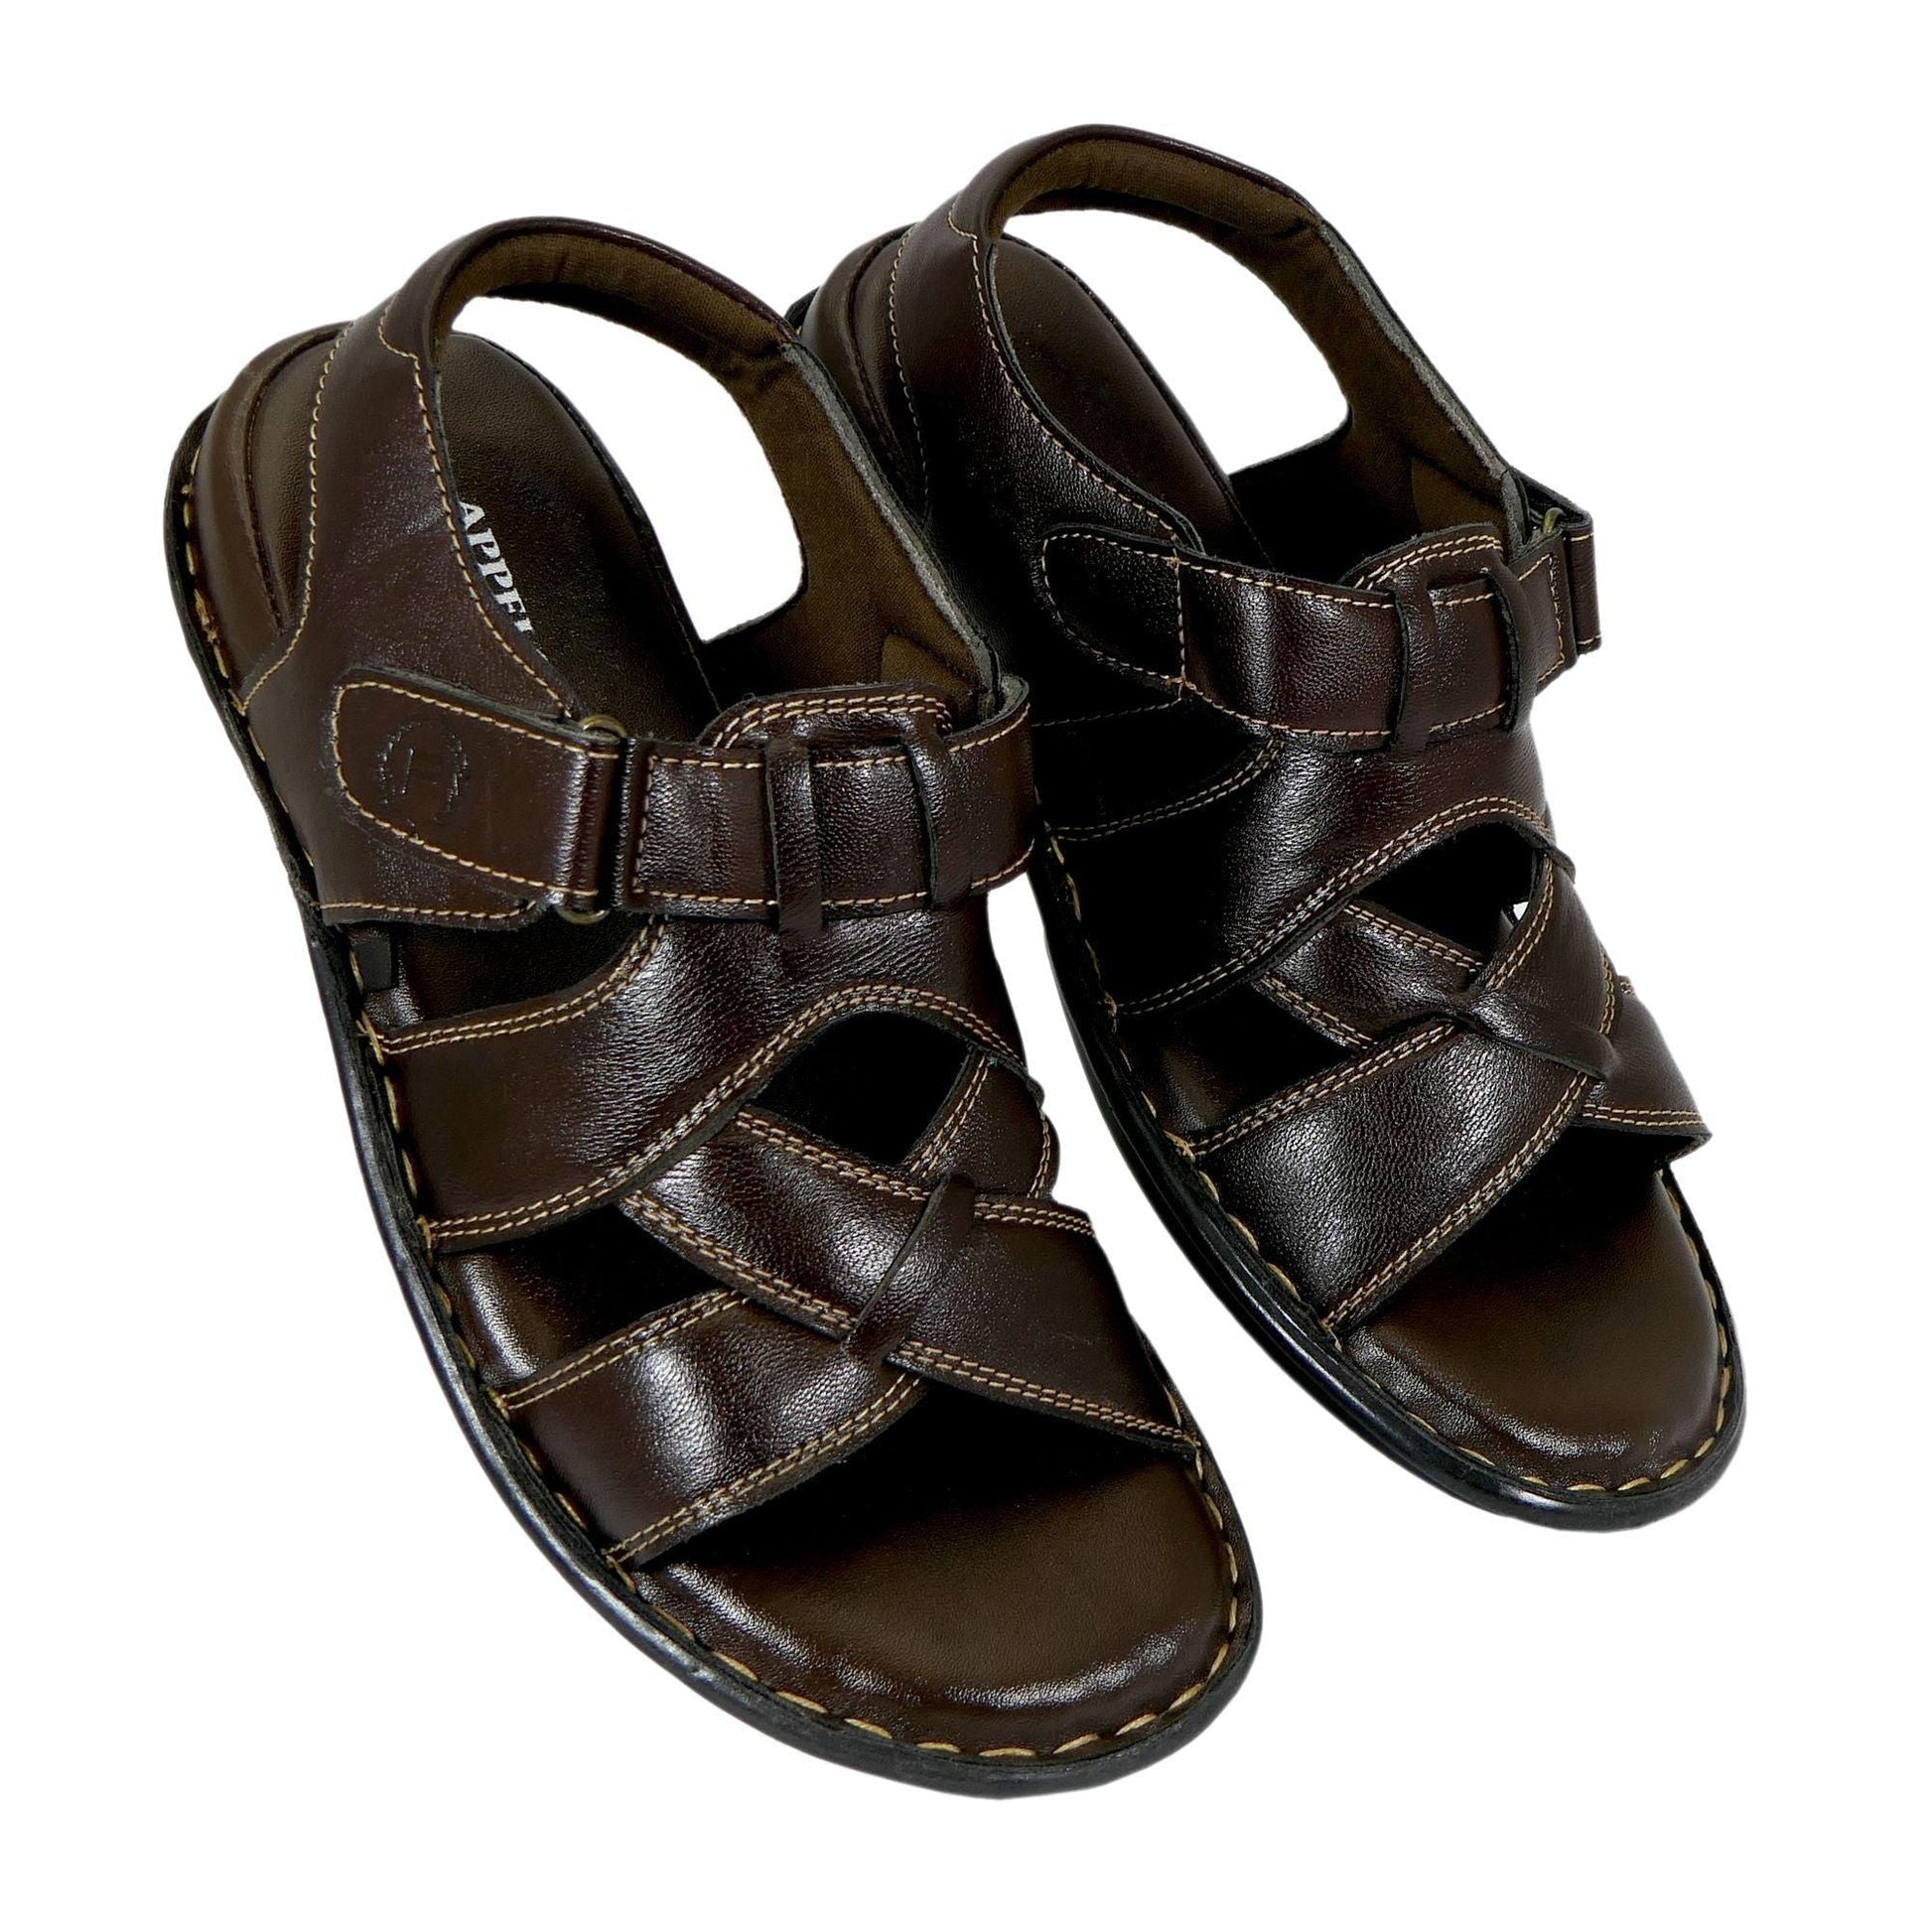 AM PM Men's Daily wear Leather Sandals 